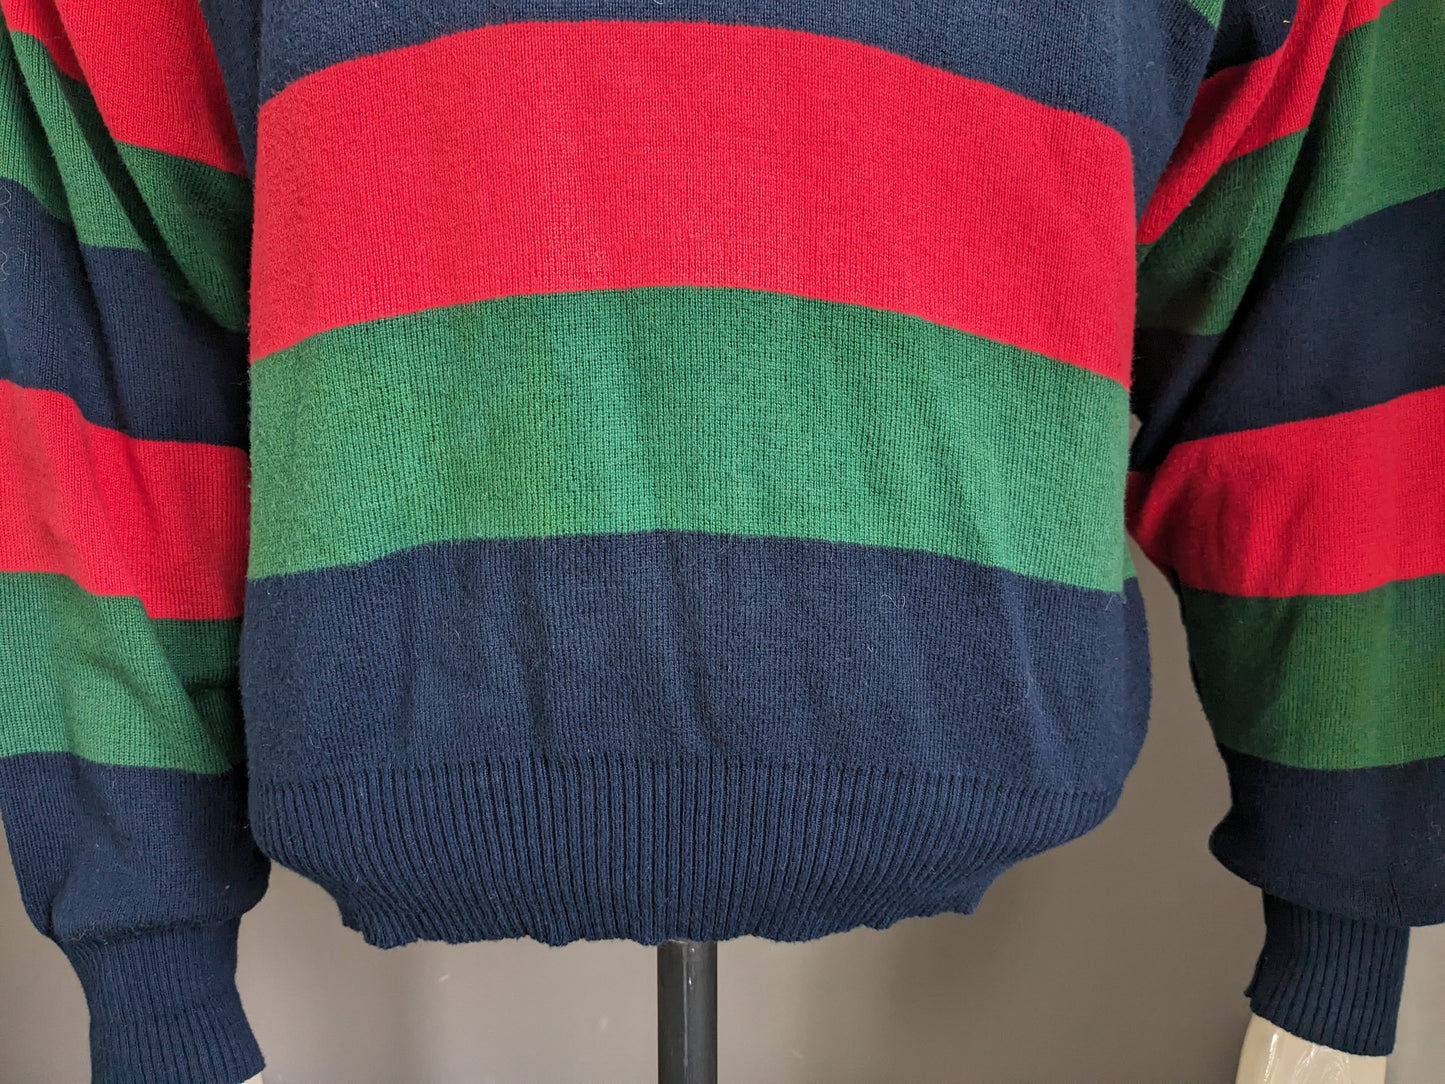 Red Green Vintage Polotrui. Green blue red striped. Size L / XL.